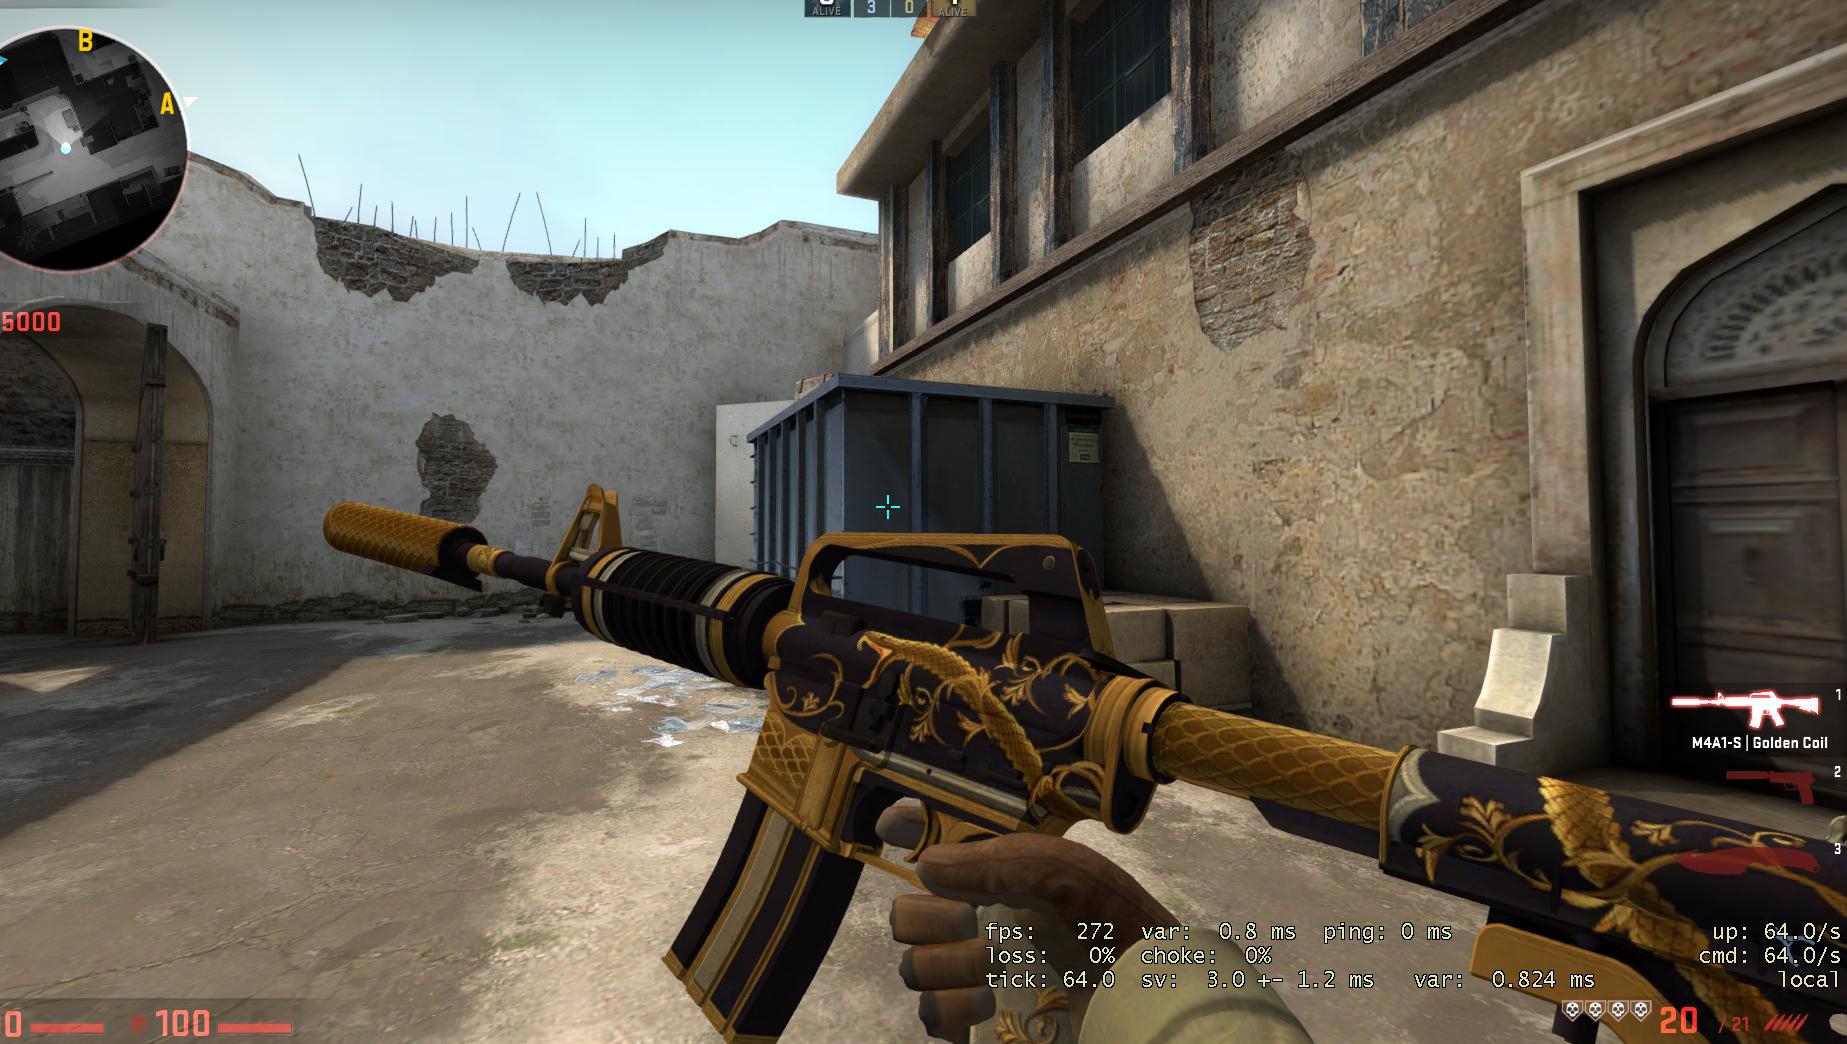 Golden coil m4a1 s ft фото 27